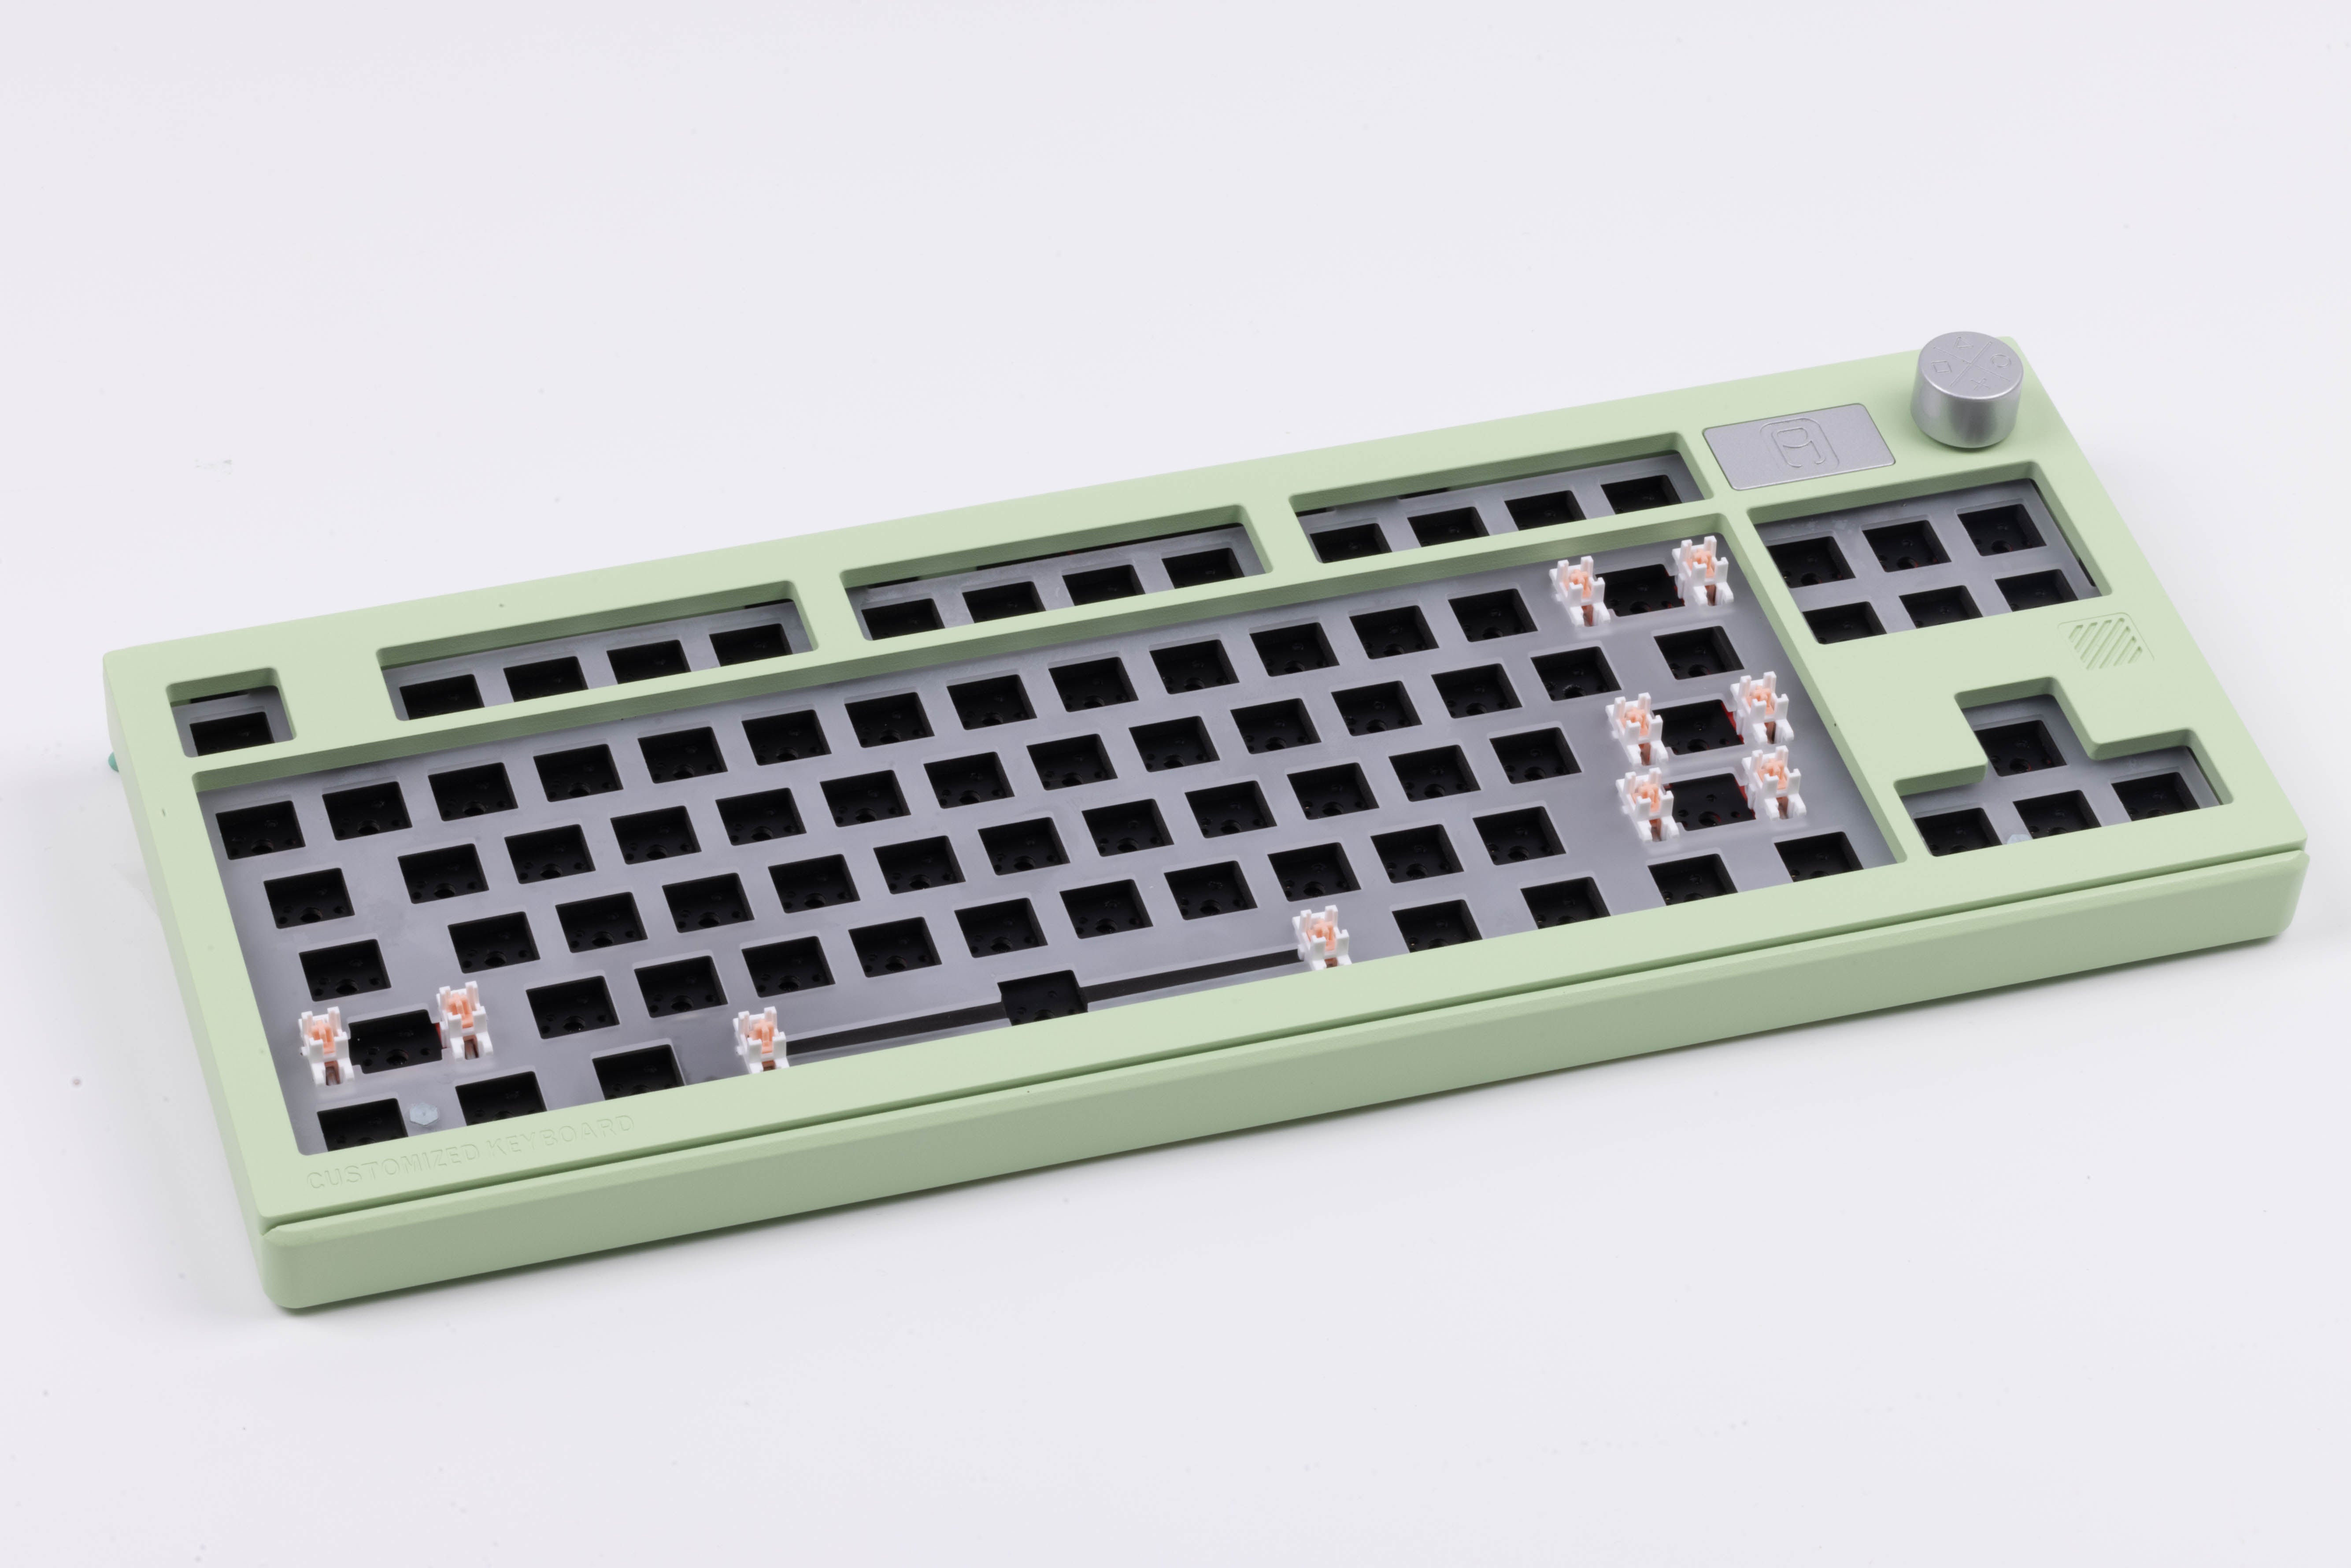 WK870 Gasket Aluminum Hot-Swappable Keyboard